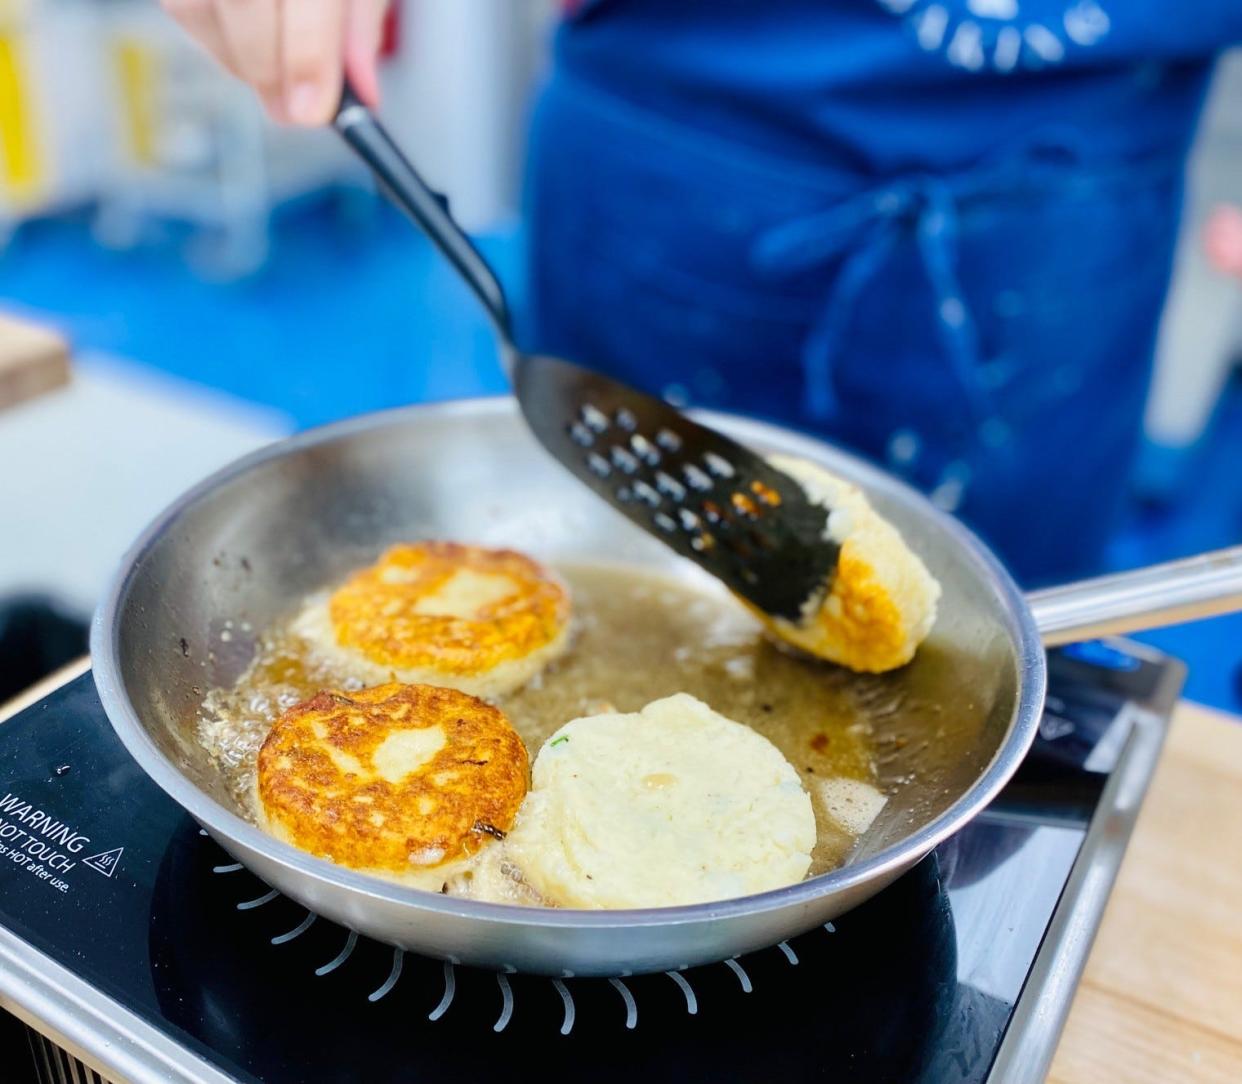 Chef Chef Angela McEllin of the Florida Academy of Baking in Satellite Beach serves these Irish Potato Cakes for breakfast in place of hash browns.